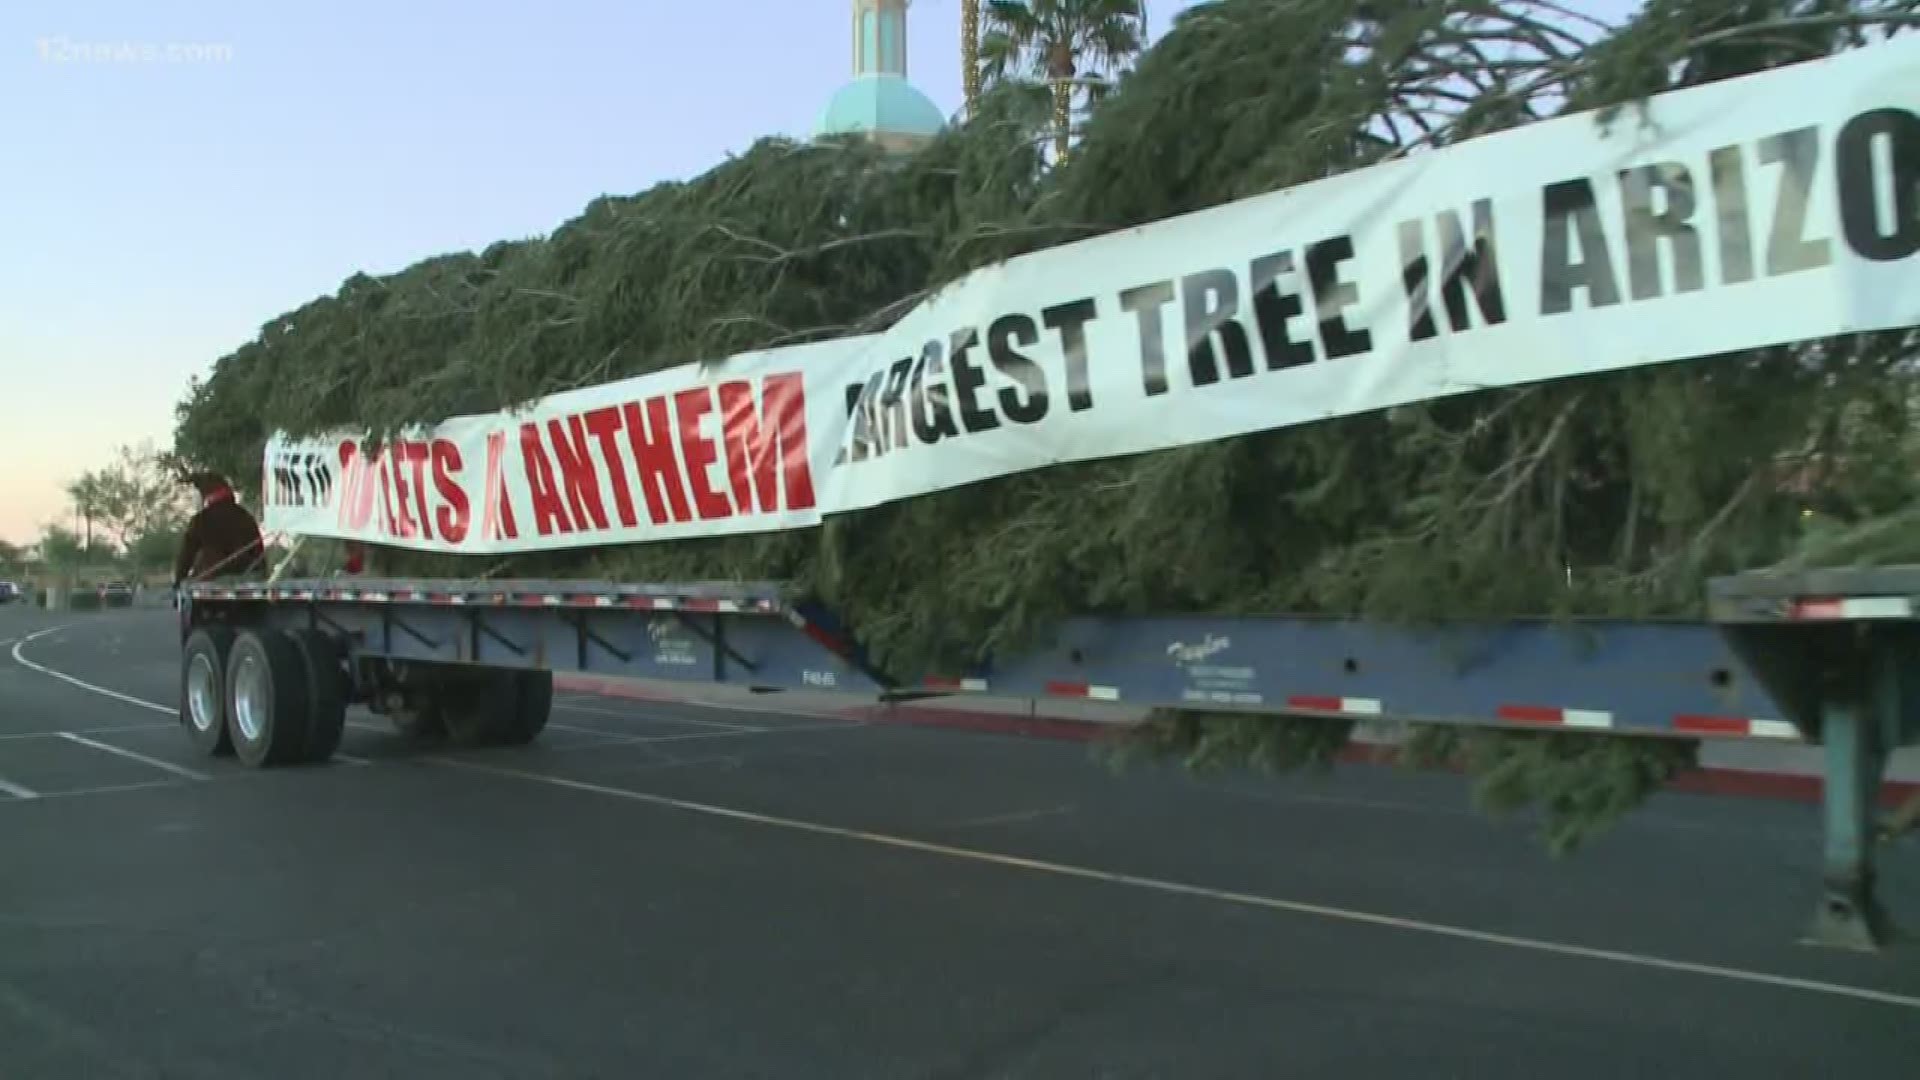 Arizona's largest Christmas tree on its way to the Outlet at Anthem where the festivities are already getting started.